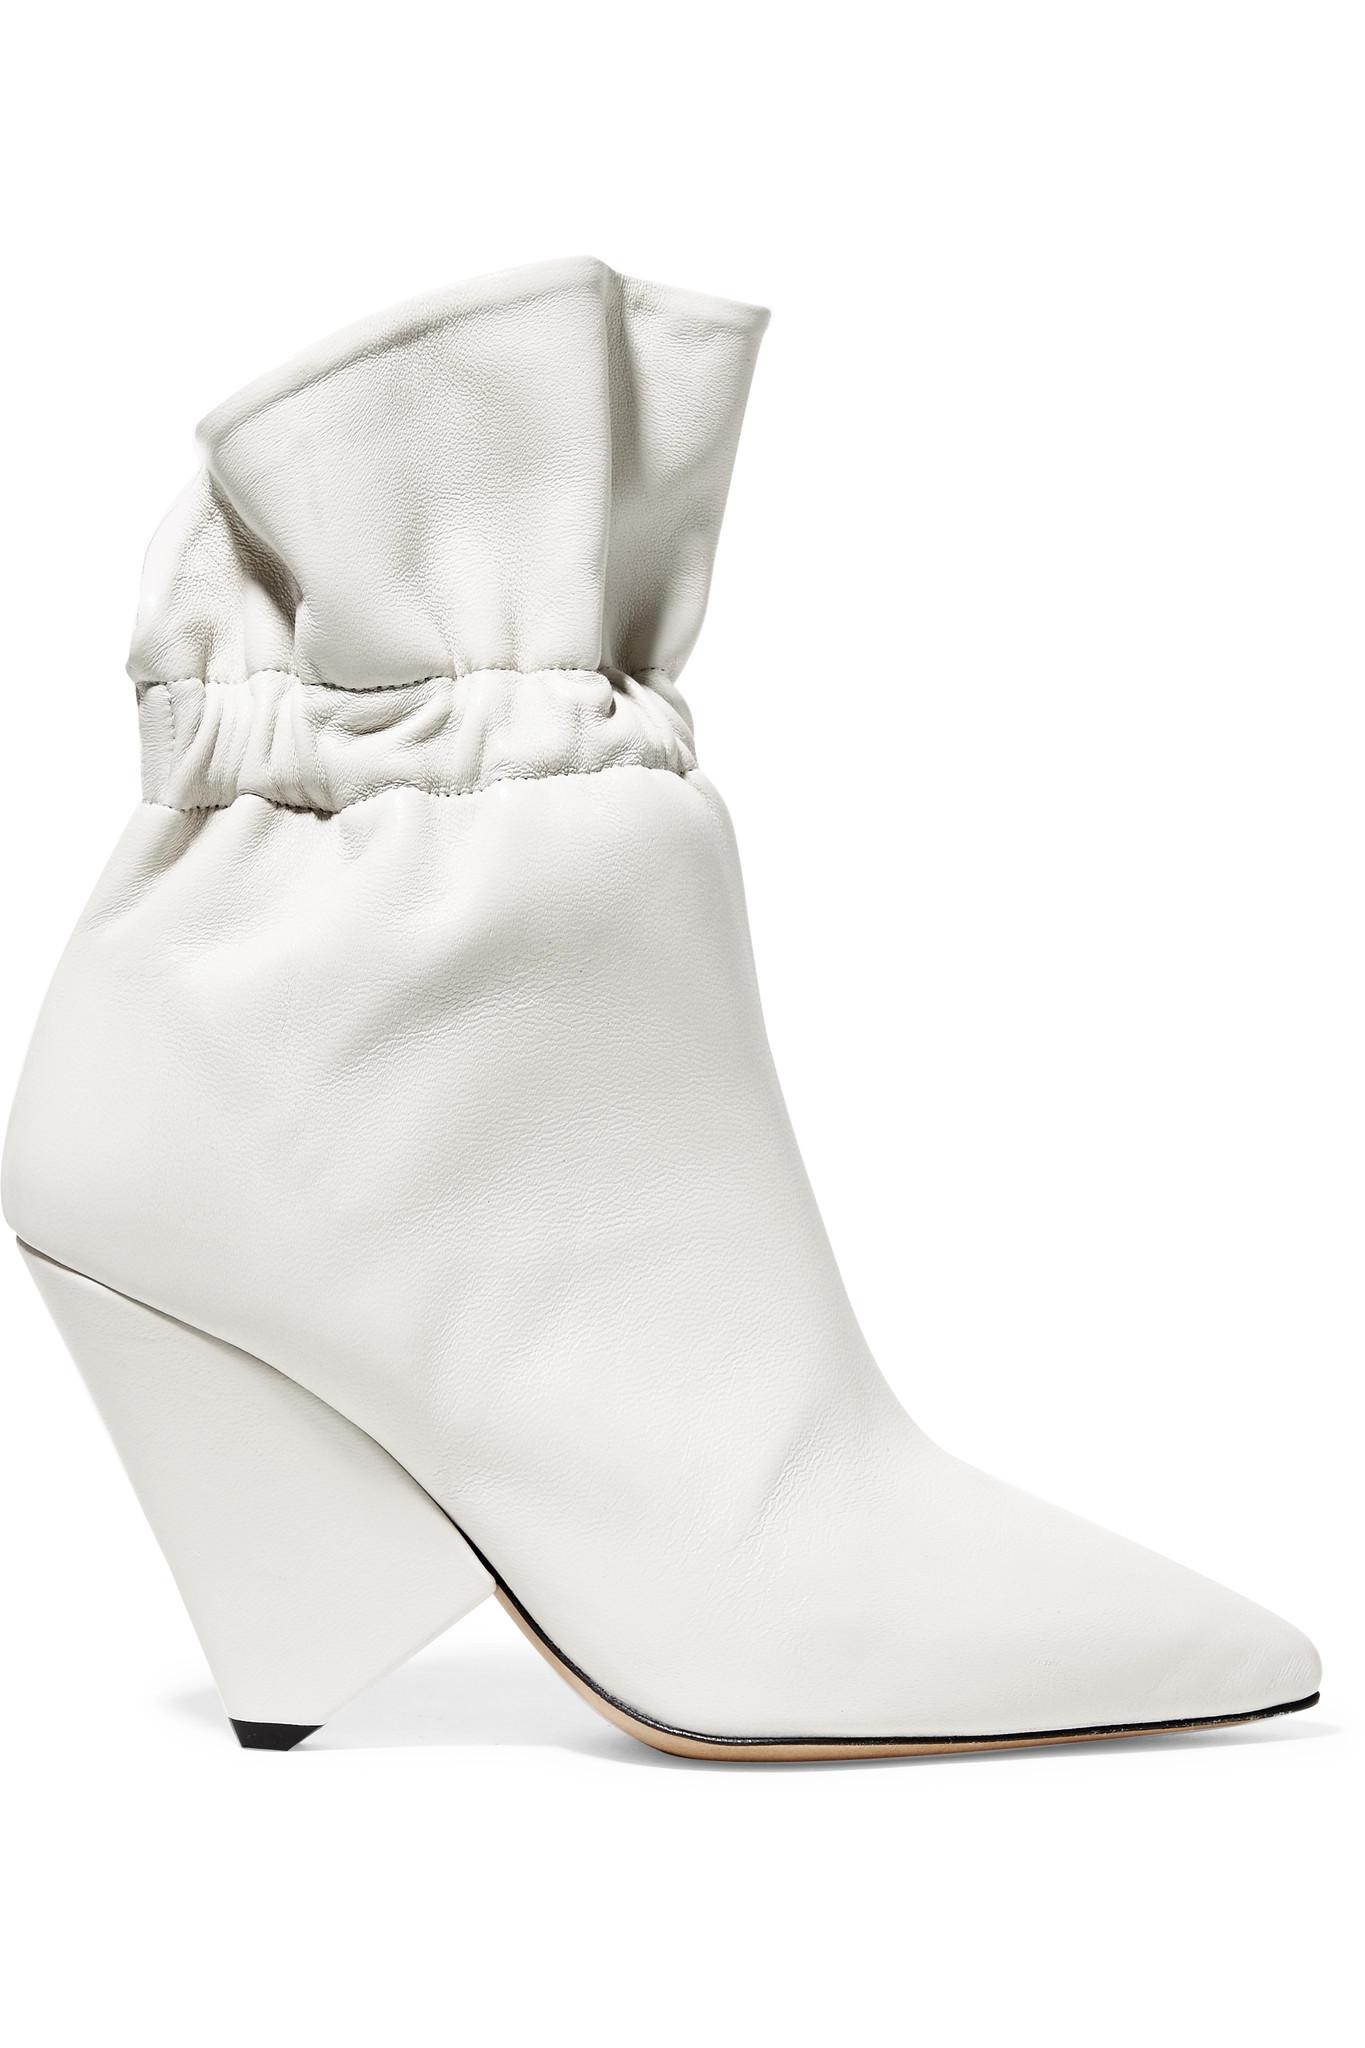 Isabel Marant White Booties United Kingdom, SAVE 52% - aveclumiere.com